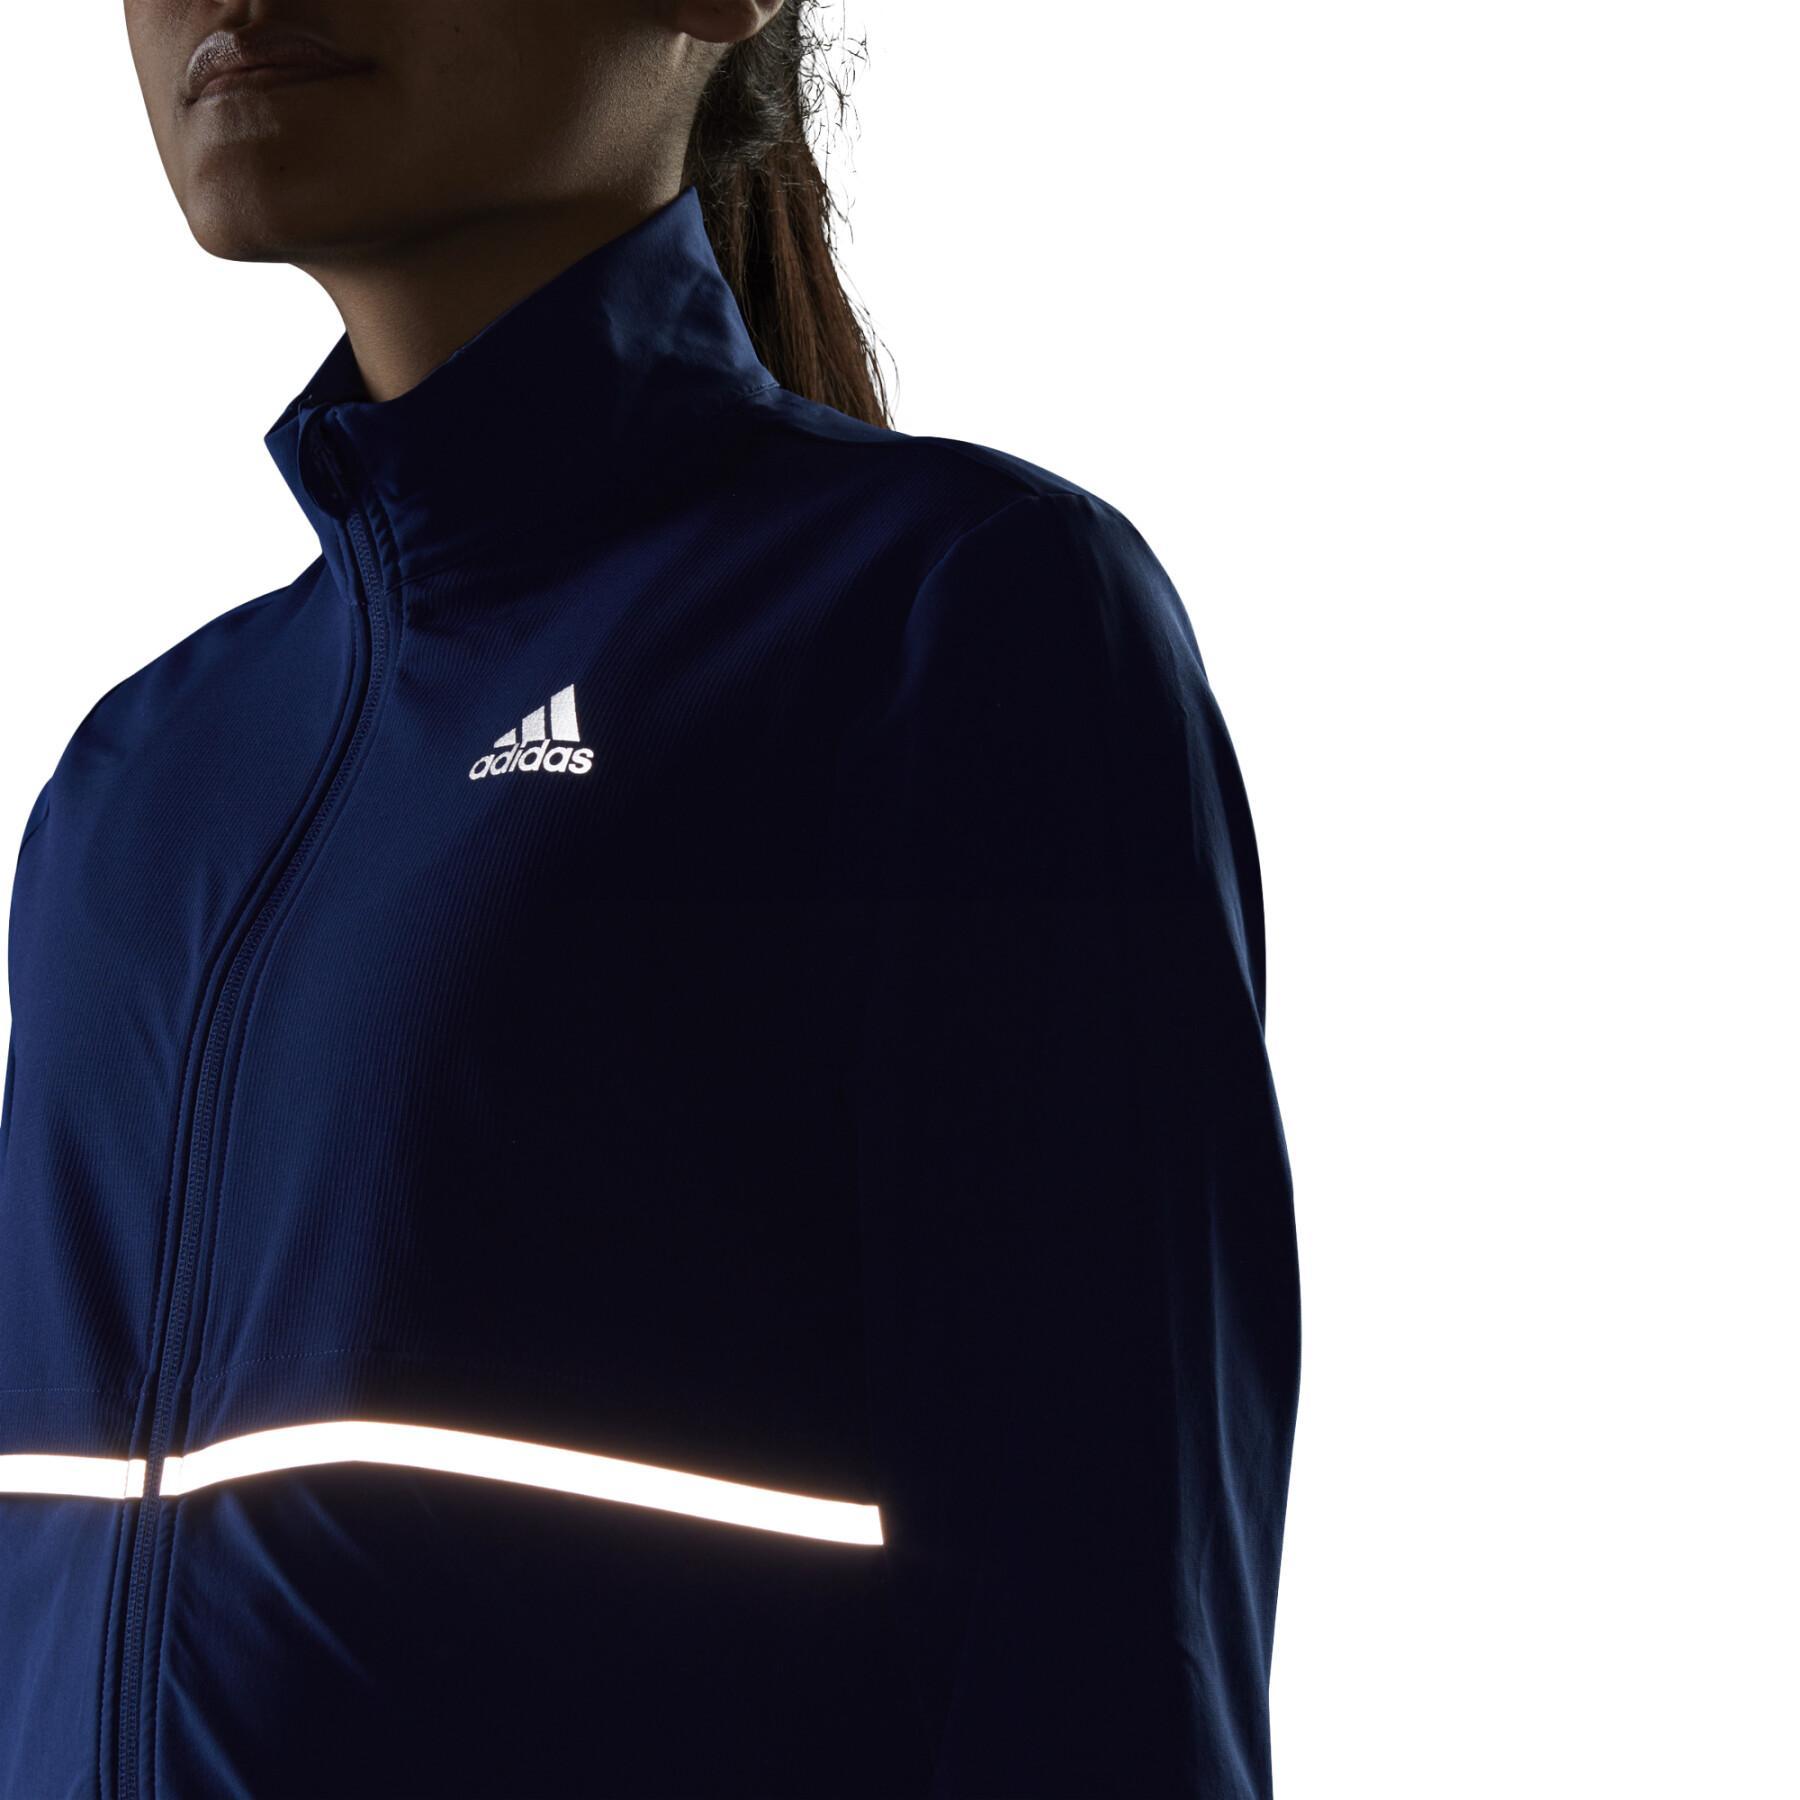 Softshell jacket for women adidas Own The Run